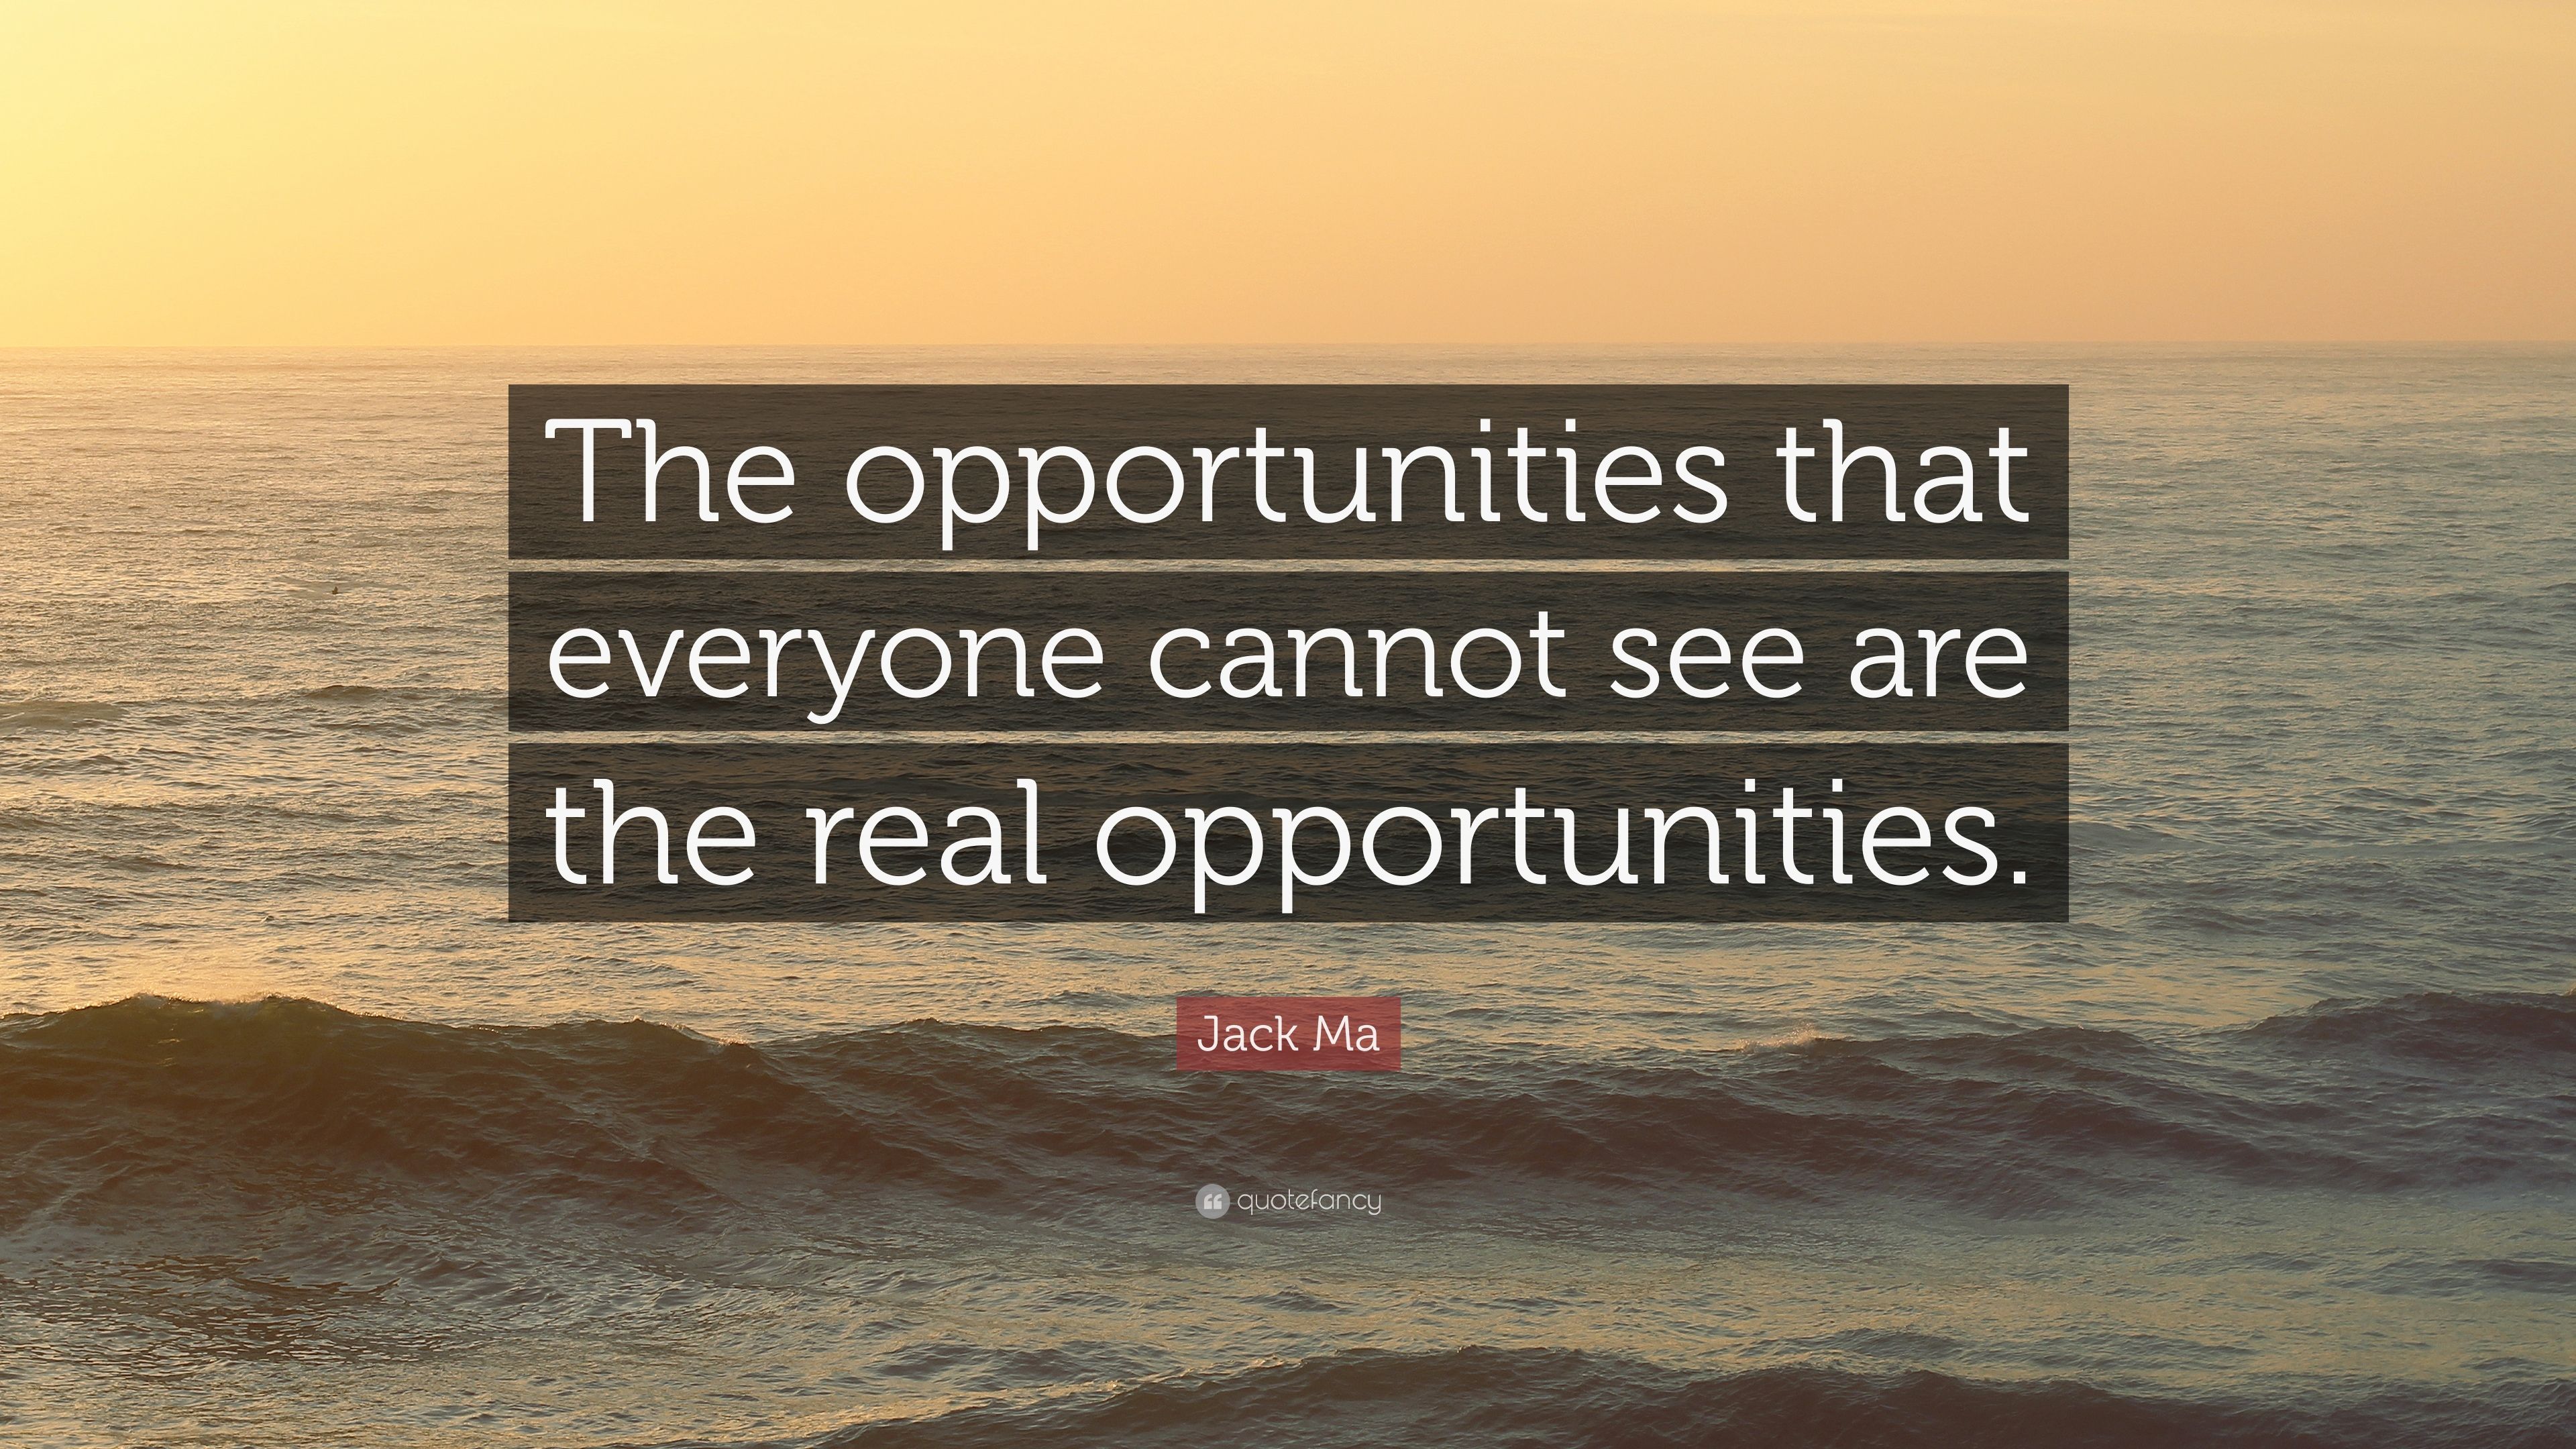 Jack Ma Quote: “The opportunities that everyone cannot see are